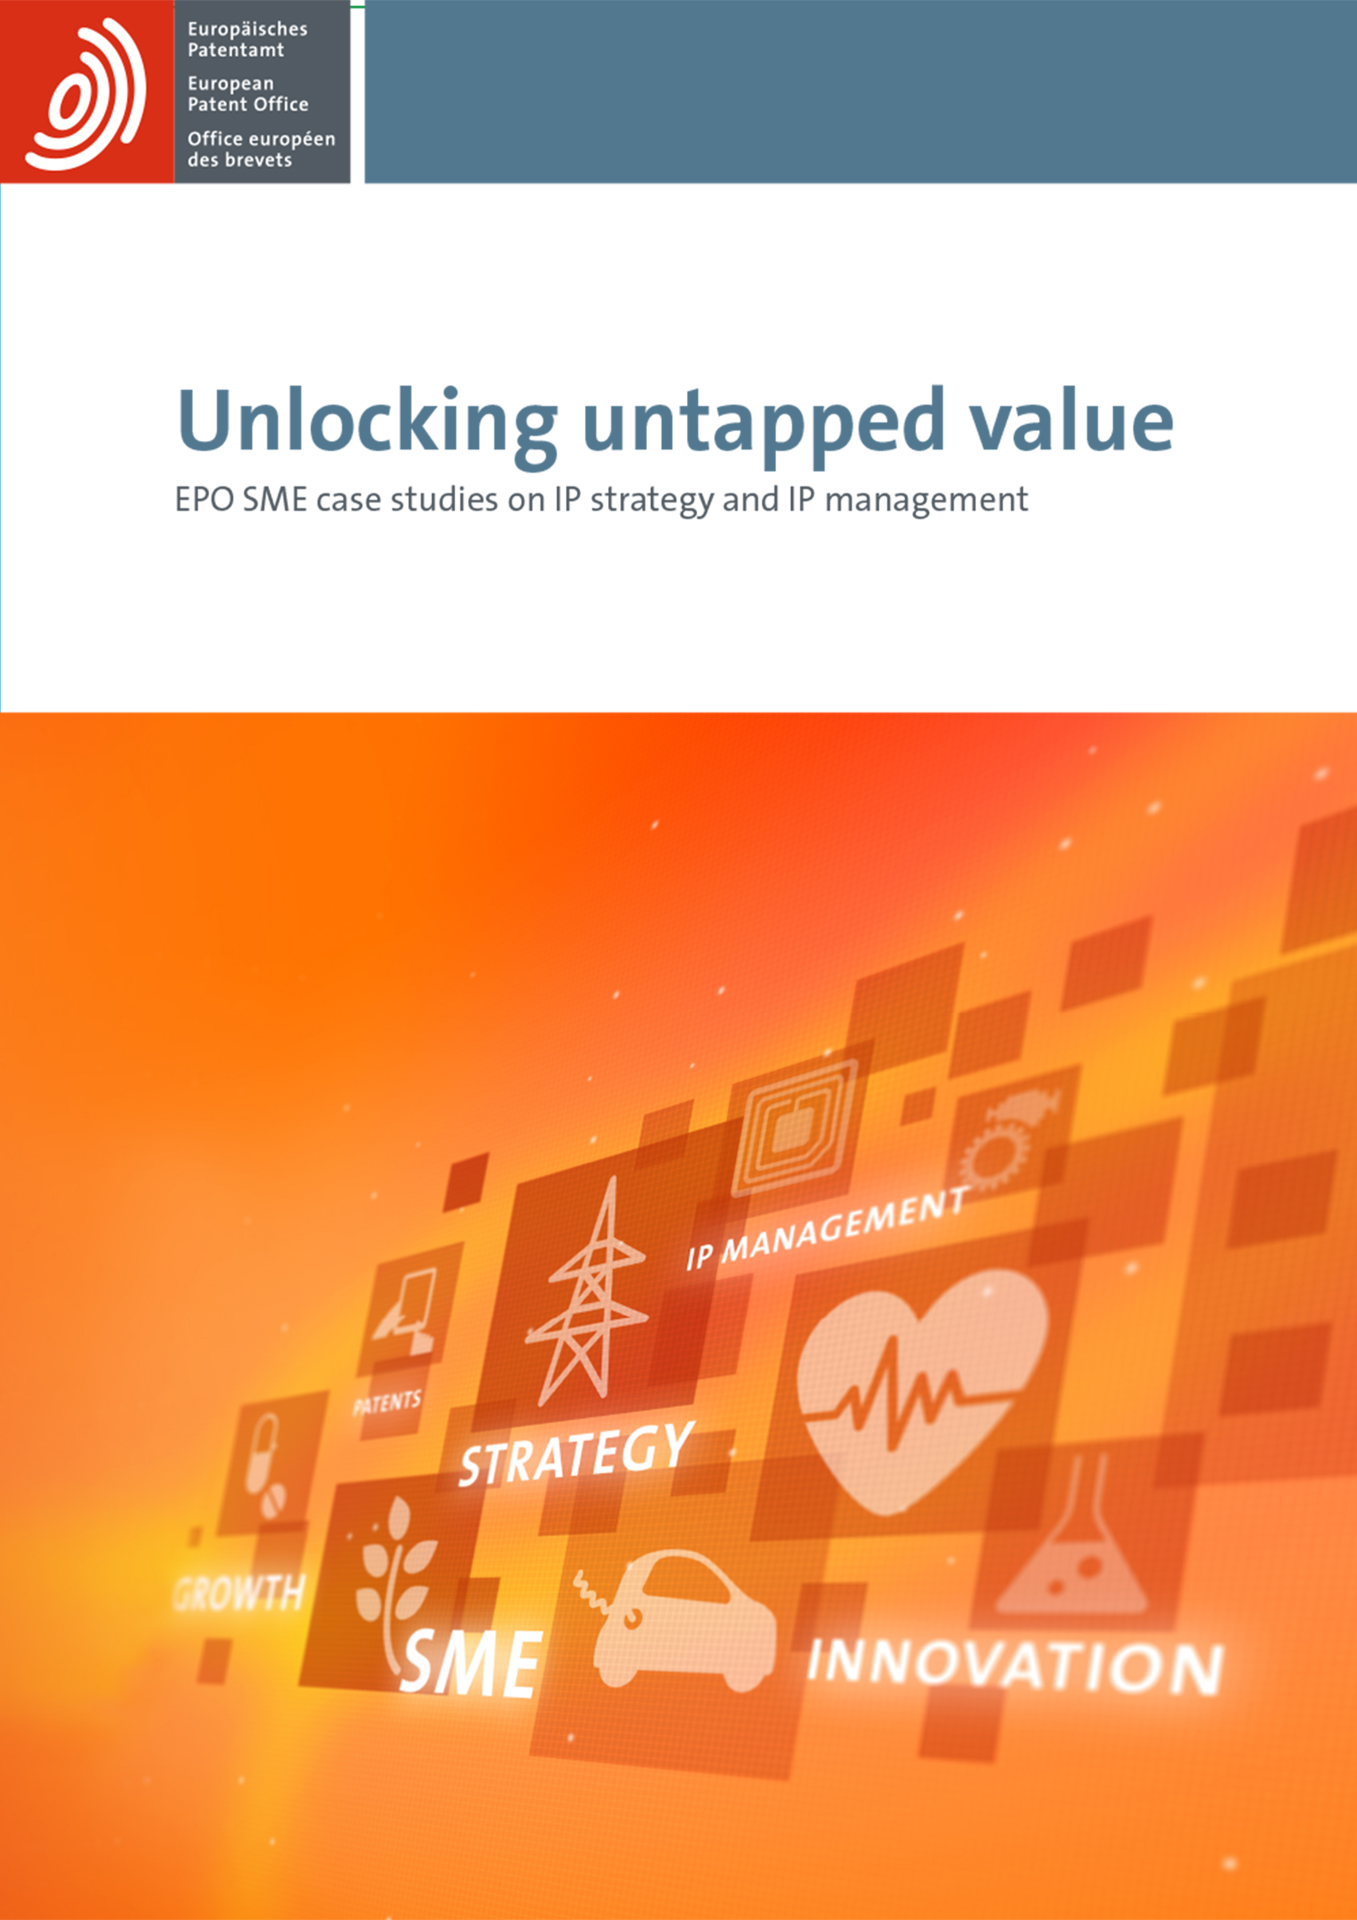 EPO publication cover with orange background and text - growth, strategy, innovation